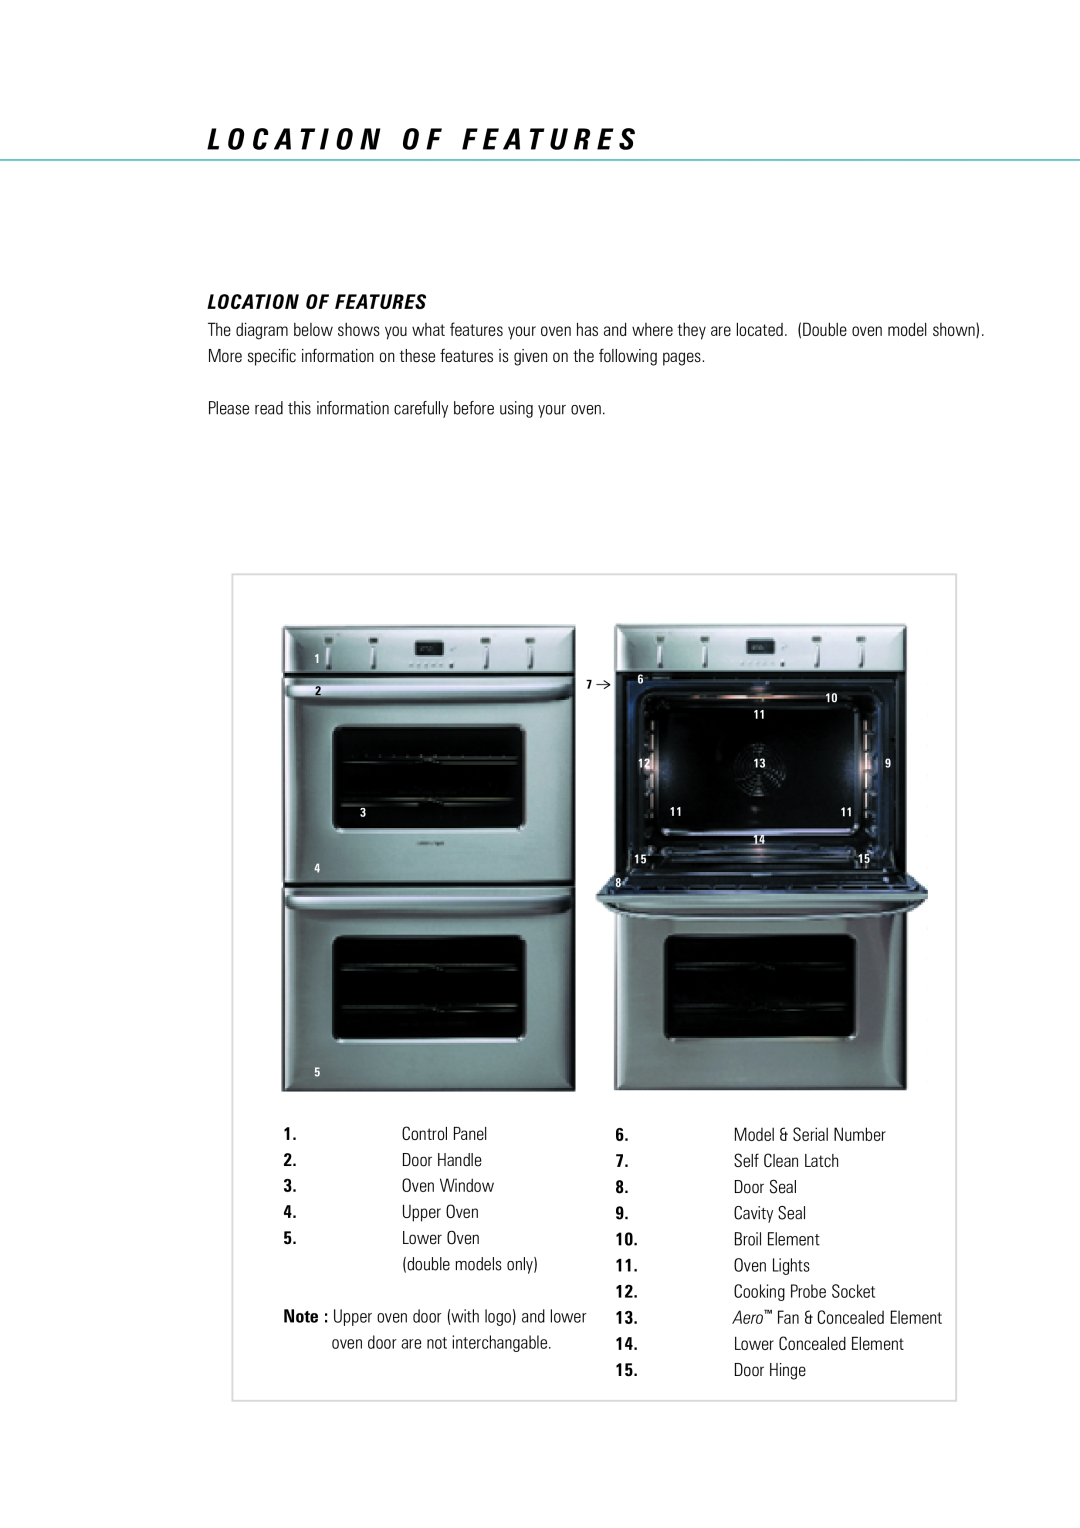 Fisher & Paykel AeroTech manual L O C A T I O N O F F E A T U R E S, Location Of Features 